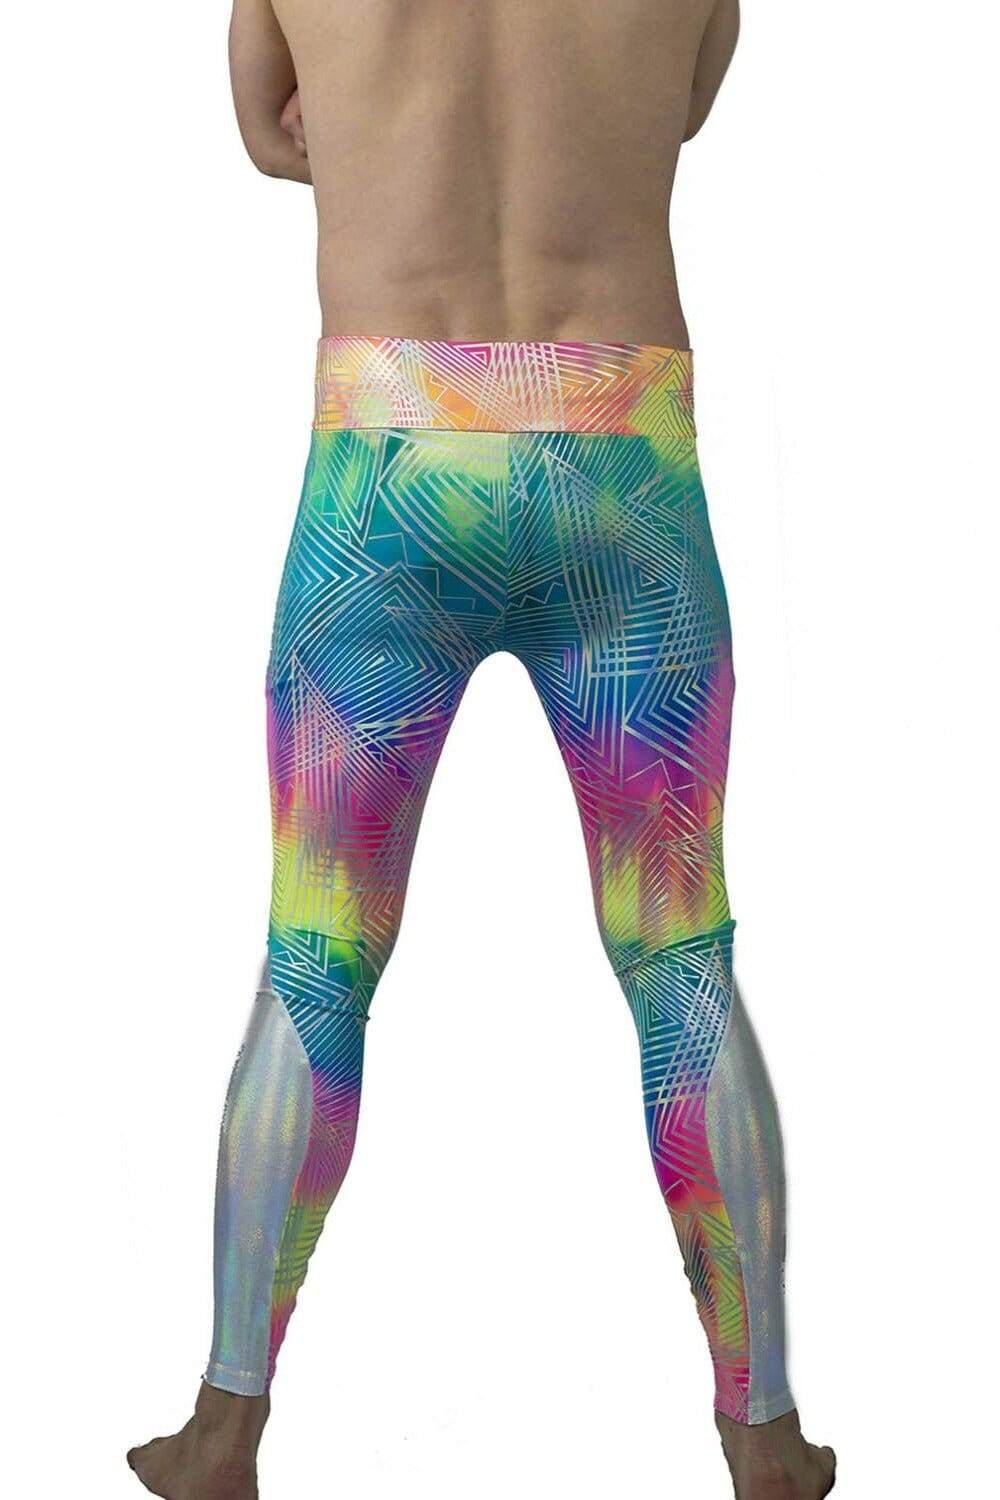 mens neon and Holographic silver geometric print festival meggings spandex tights with hidden pockets by Love Khaos